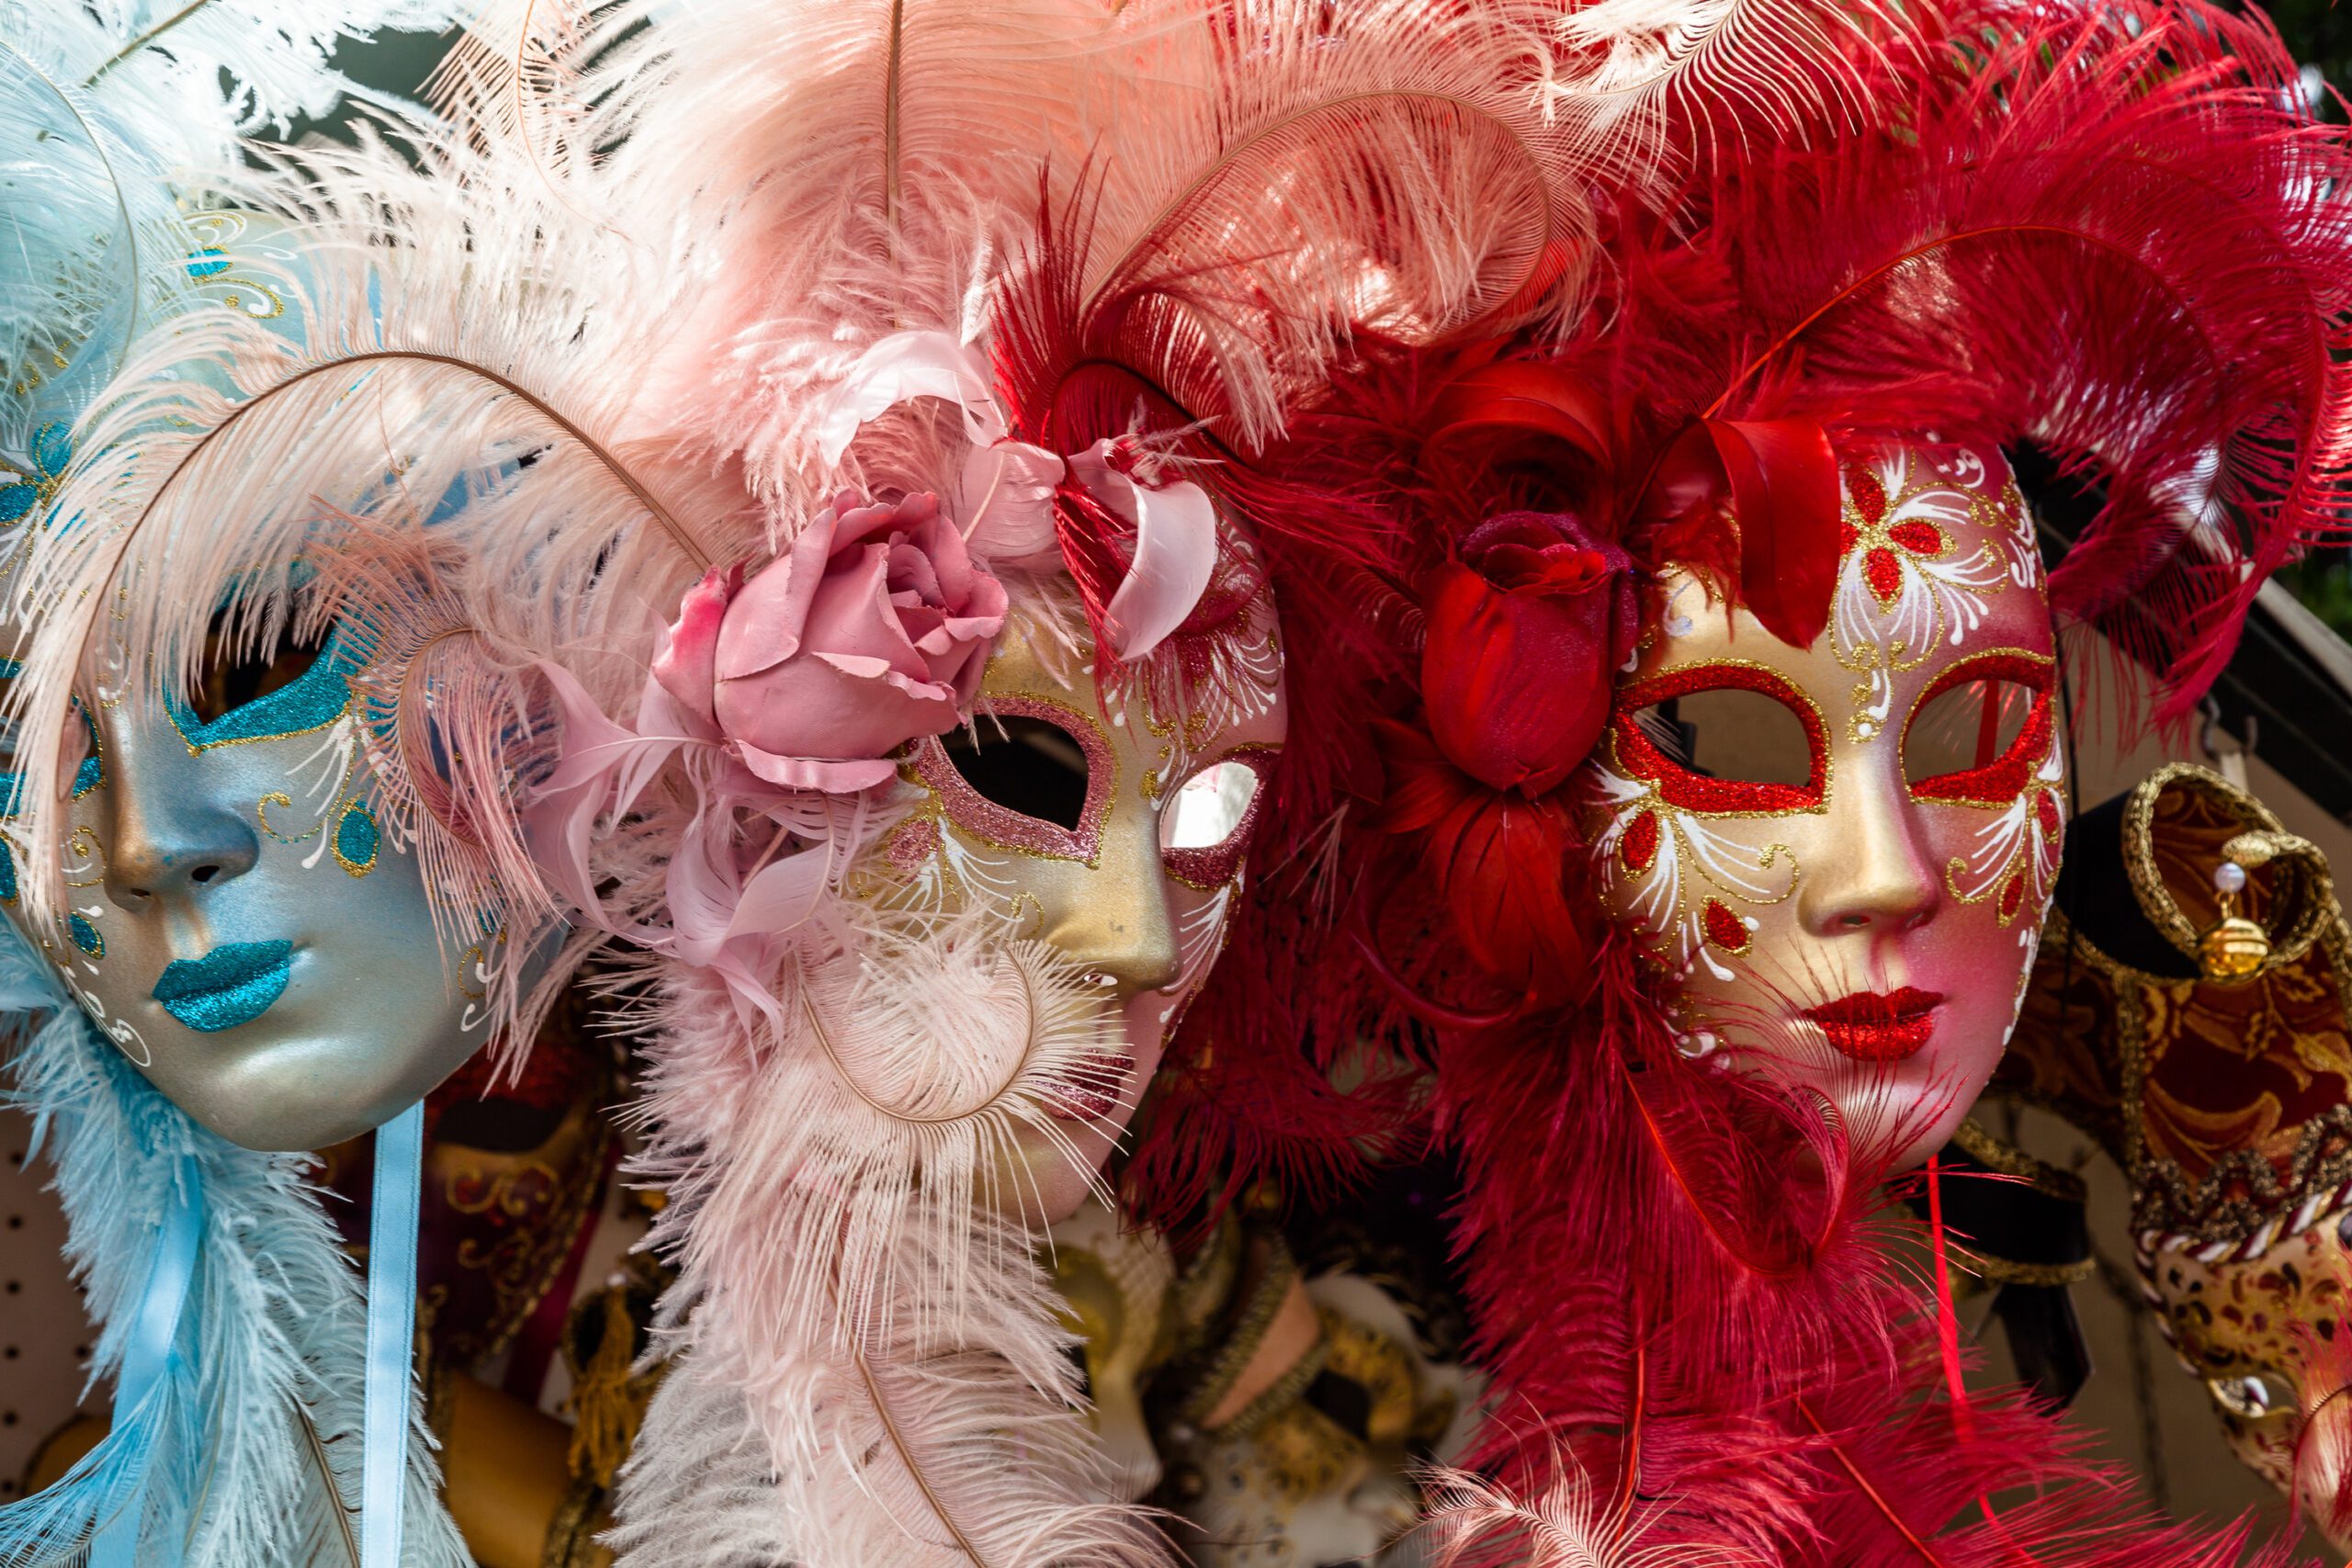 Close-up of colorful Venetian masquerade masks with intricate designs